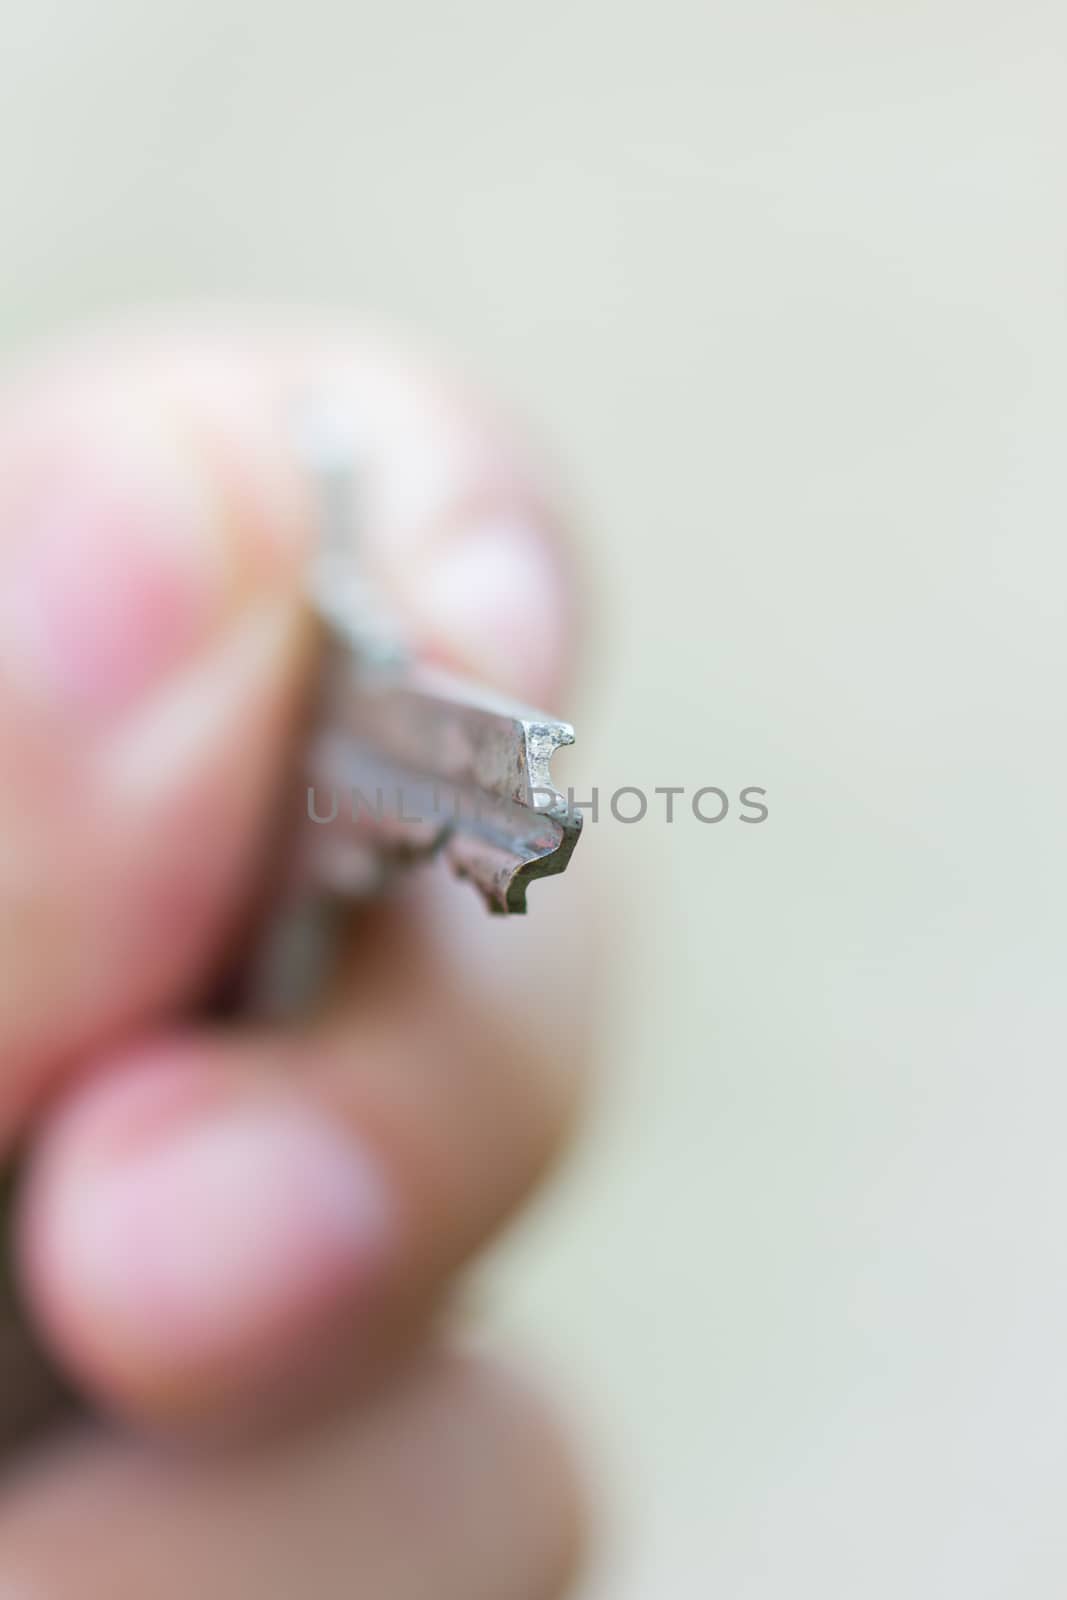  Closeup of key in hand to open. Shallow depth of field  by a3701027